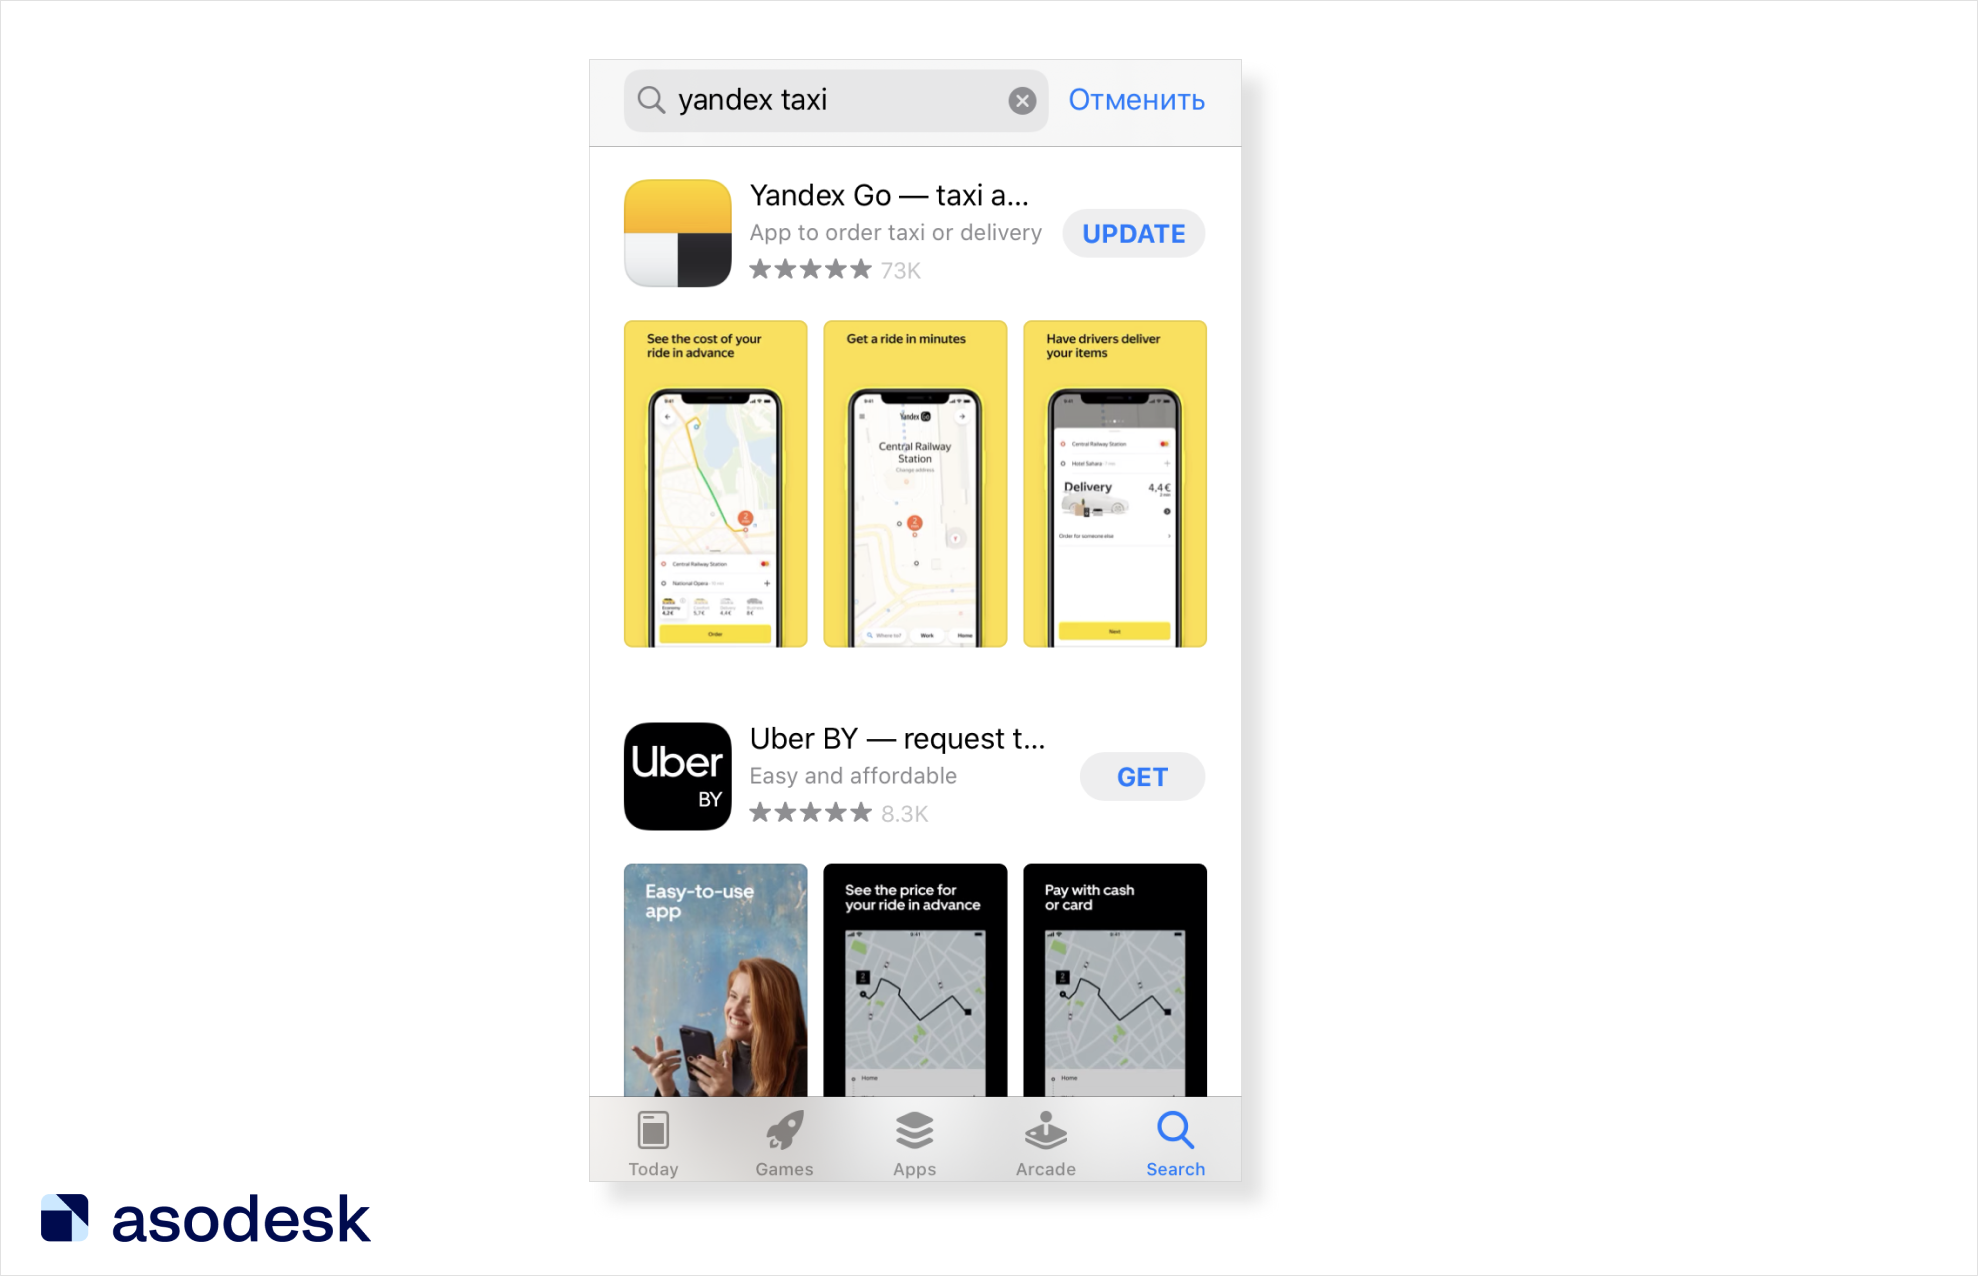 Search results for "Yandex" in the App Store